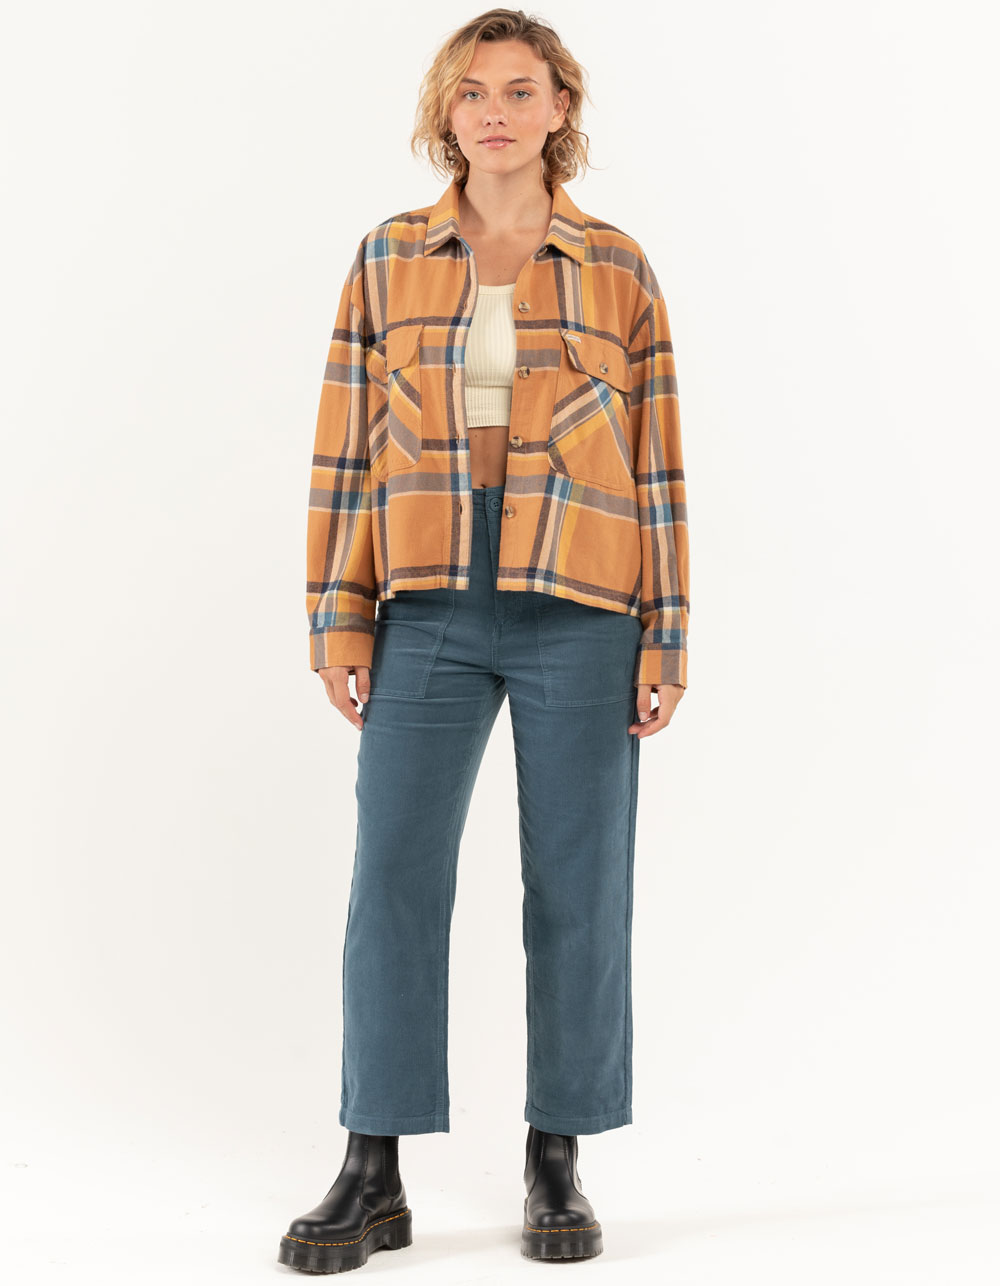 BRIXTON Bowery Womens Flannel - BROWN COMBO | Tillys